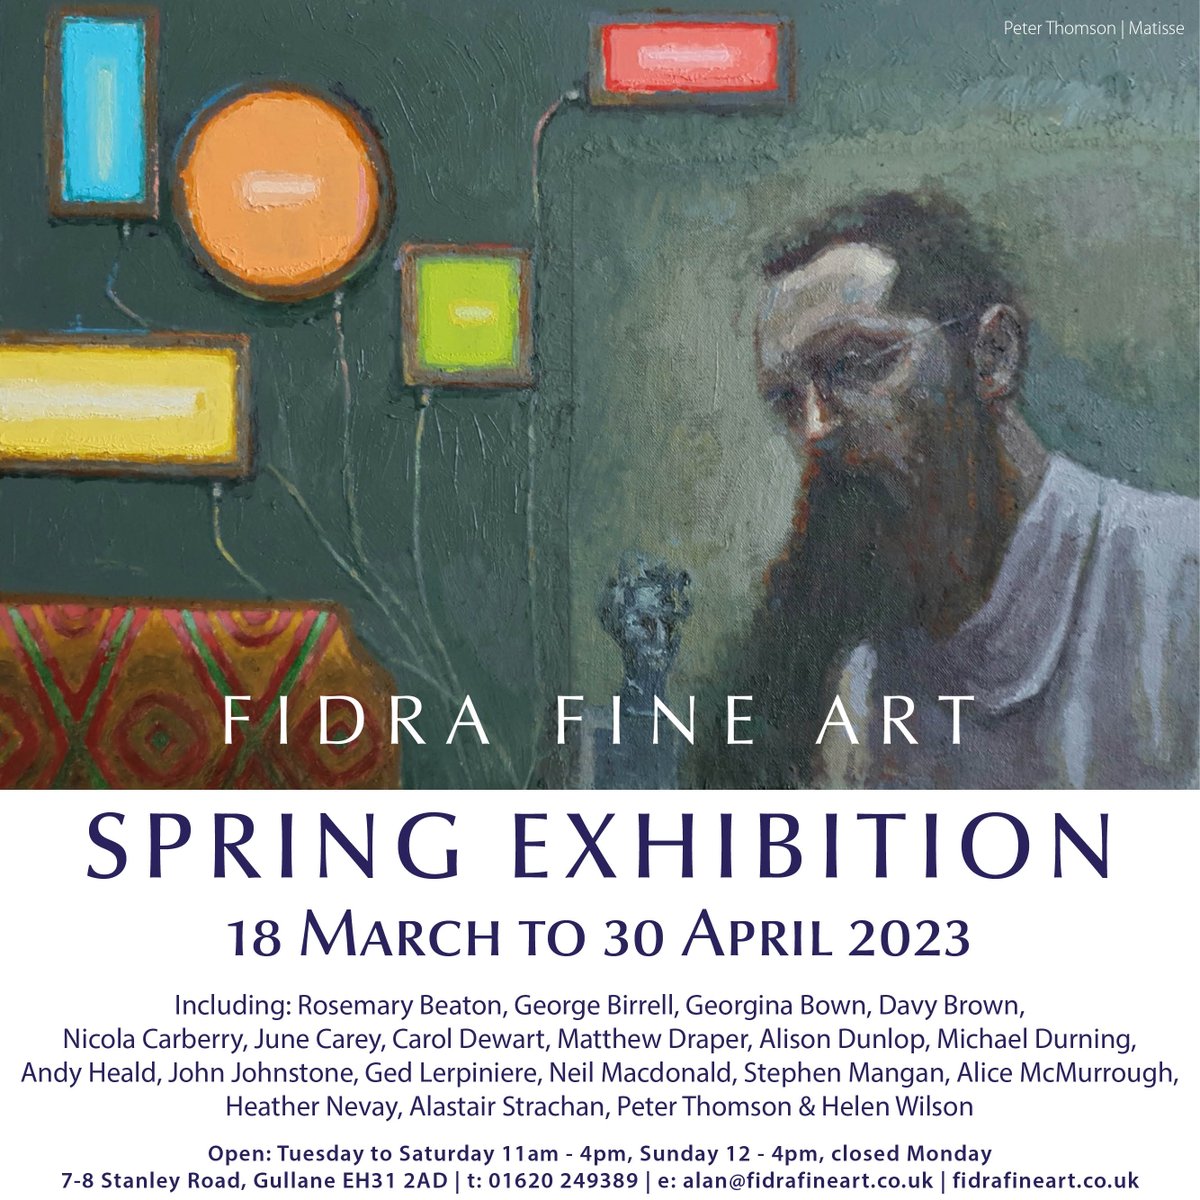 Spring exhibition opening tomorrow, Sat 18 March at 11am...refreshments from 2-5pm.

Peter Thomson RGI RSW - Matisse, Oil on Linen & Panel, 28x43cm

#PeterThomson #Matisse #portrait #oilpainting #scottishart #contemporaryart #scottishpainting